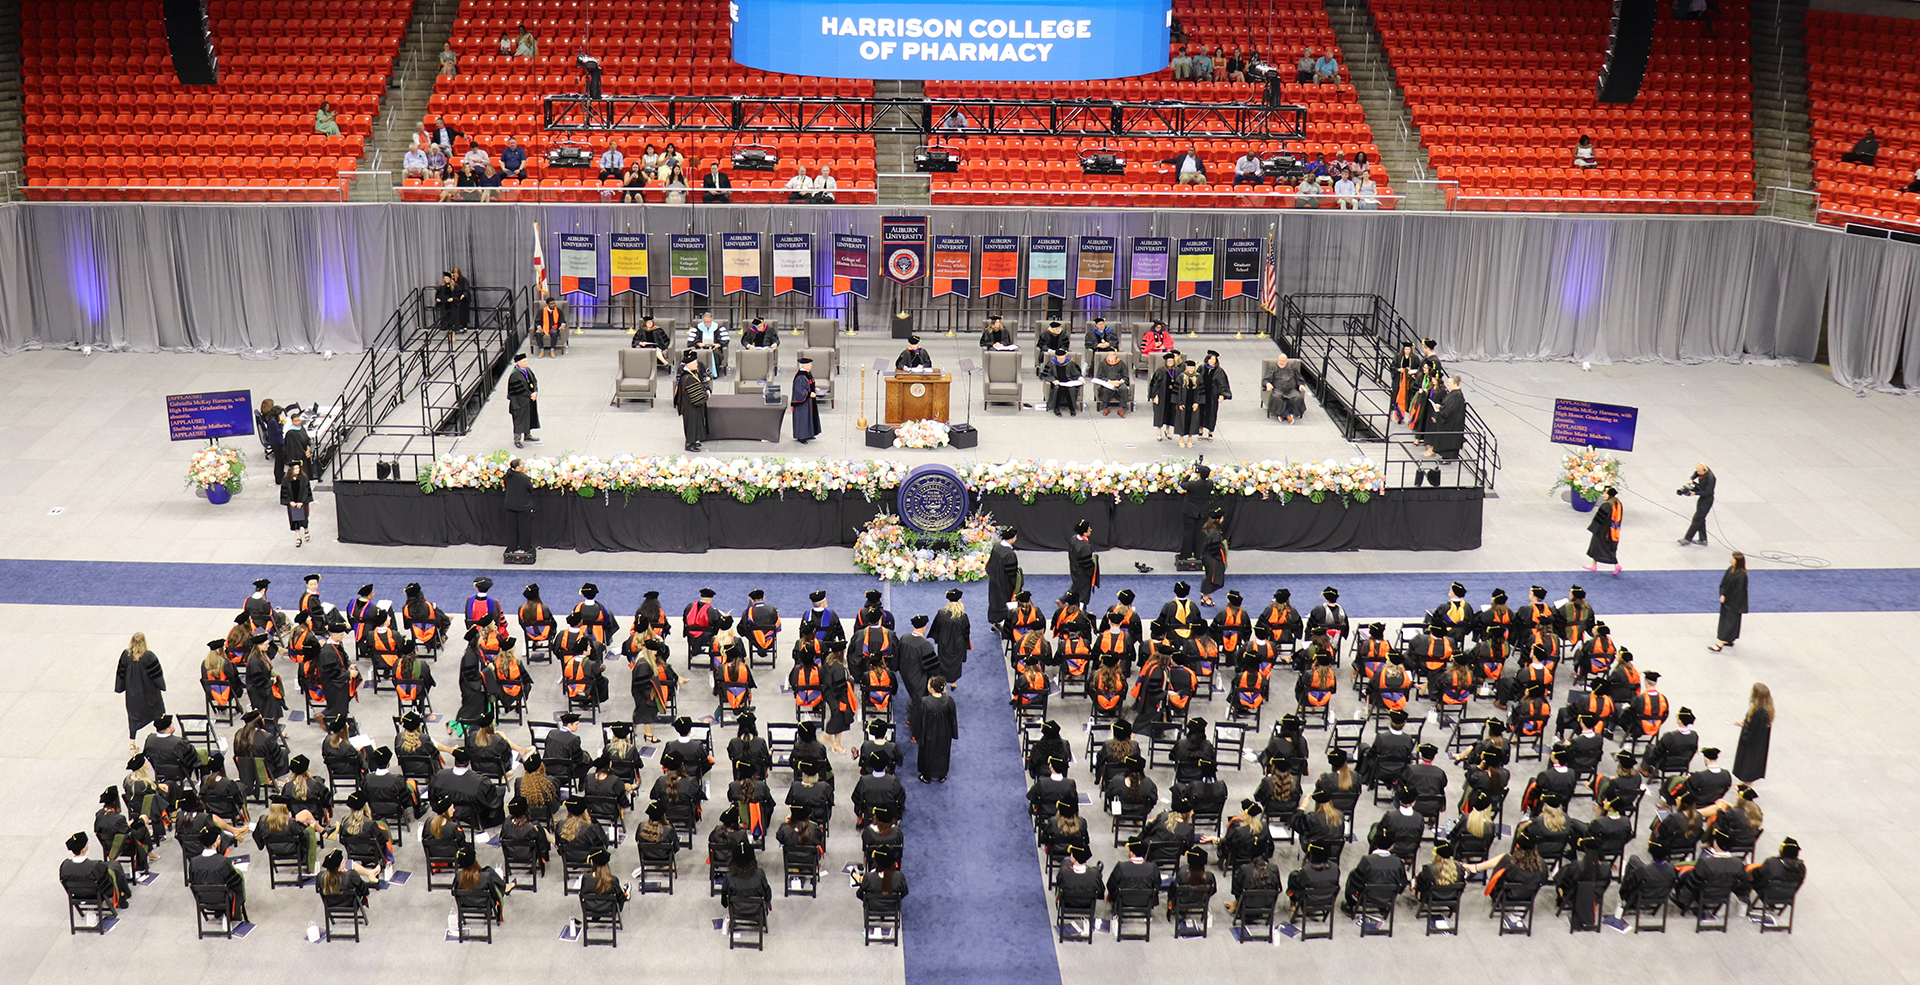 Overhead view of students approaching and crossing stage